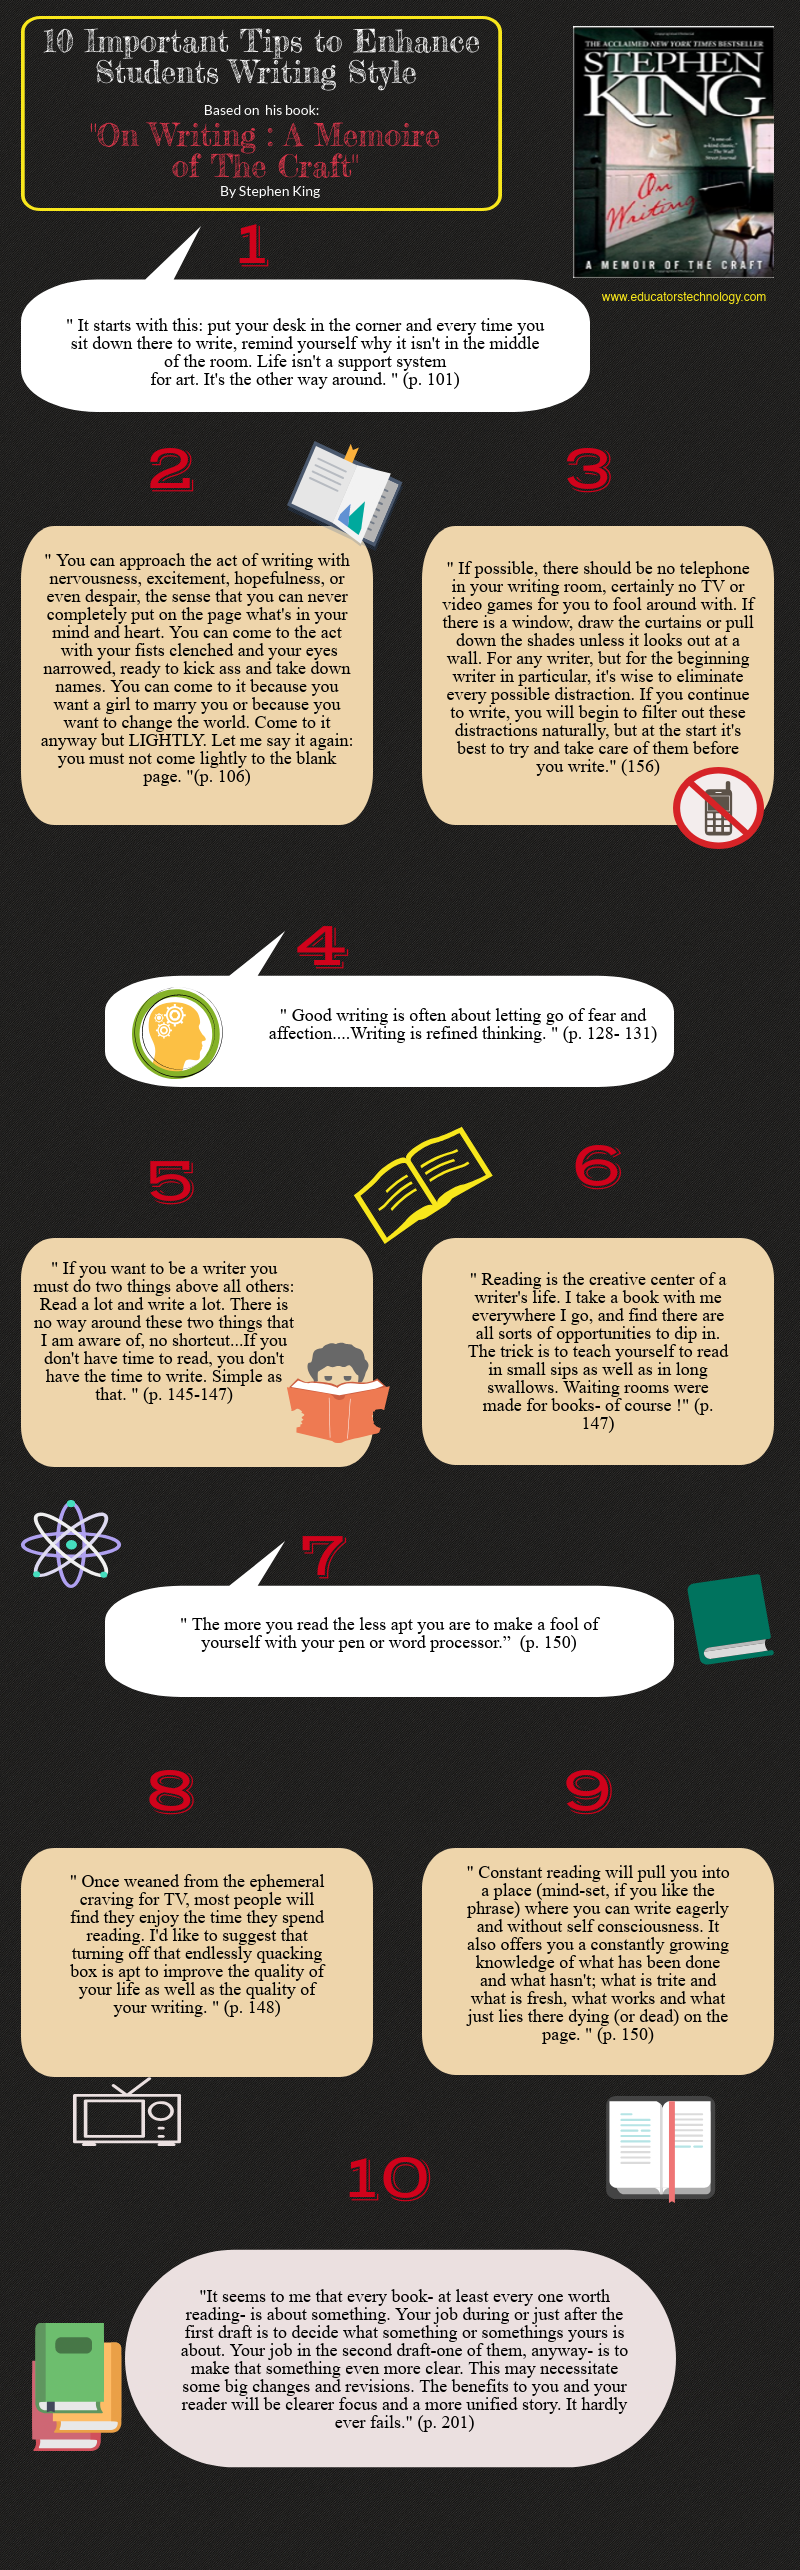 10 Important Tips to Enhance Students Writing Style (Infographic)